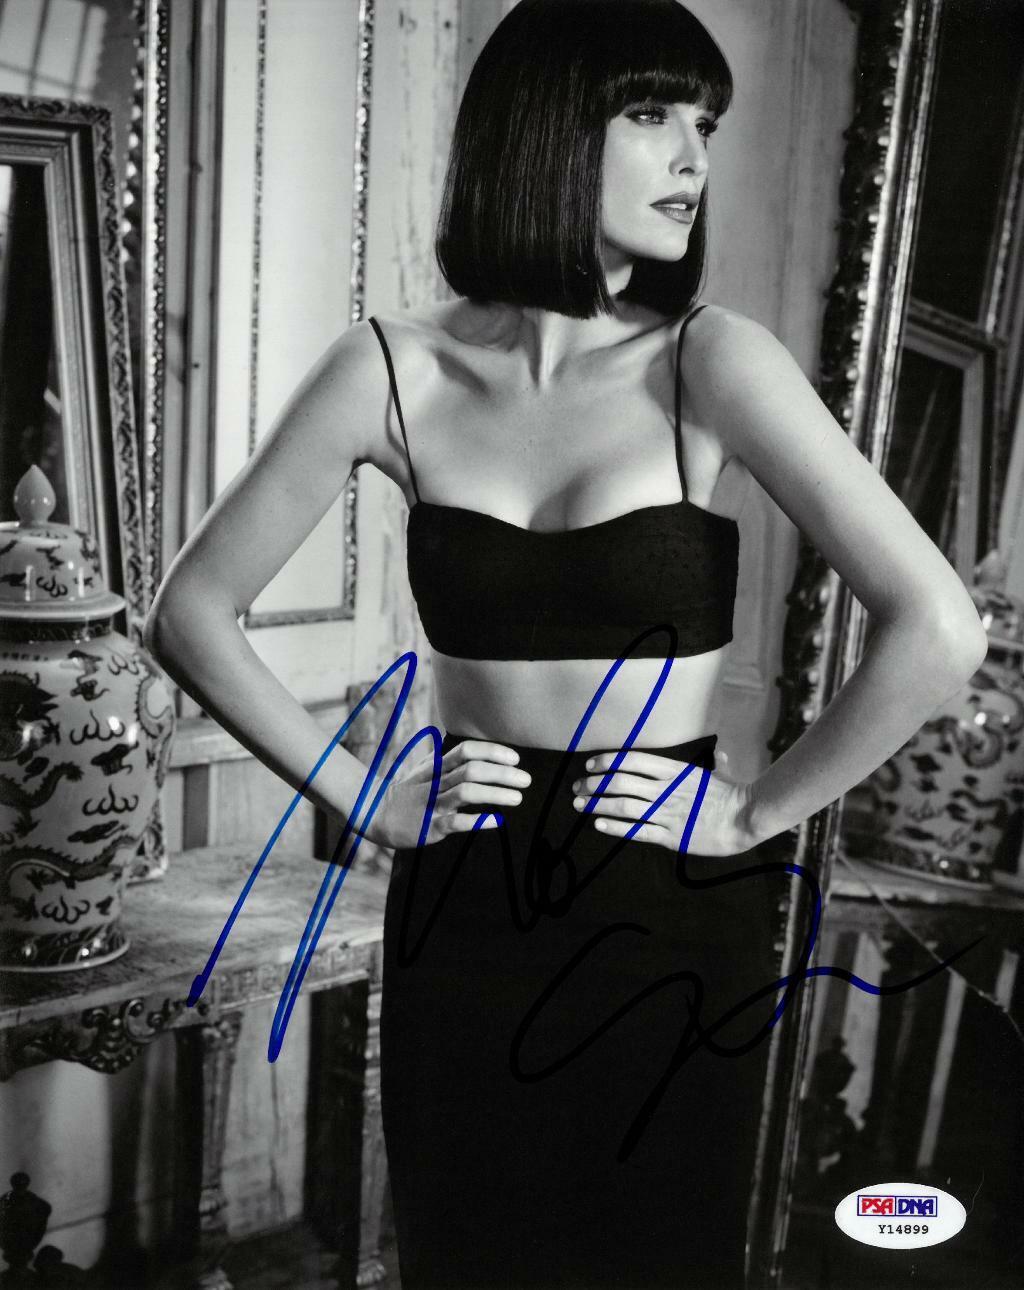 Molly Sims Signed Authentic Autographed 8x10 B/W Photo Poster painting PSA/DNA #Y14899